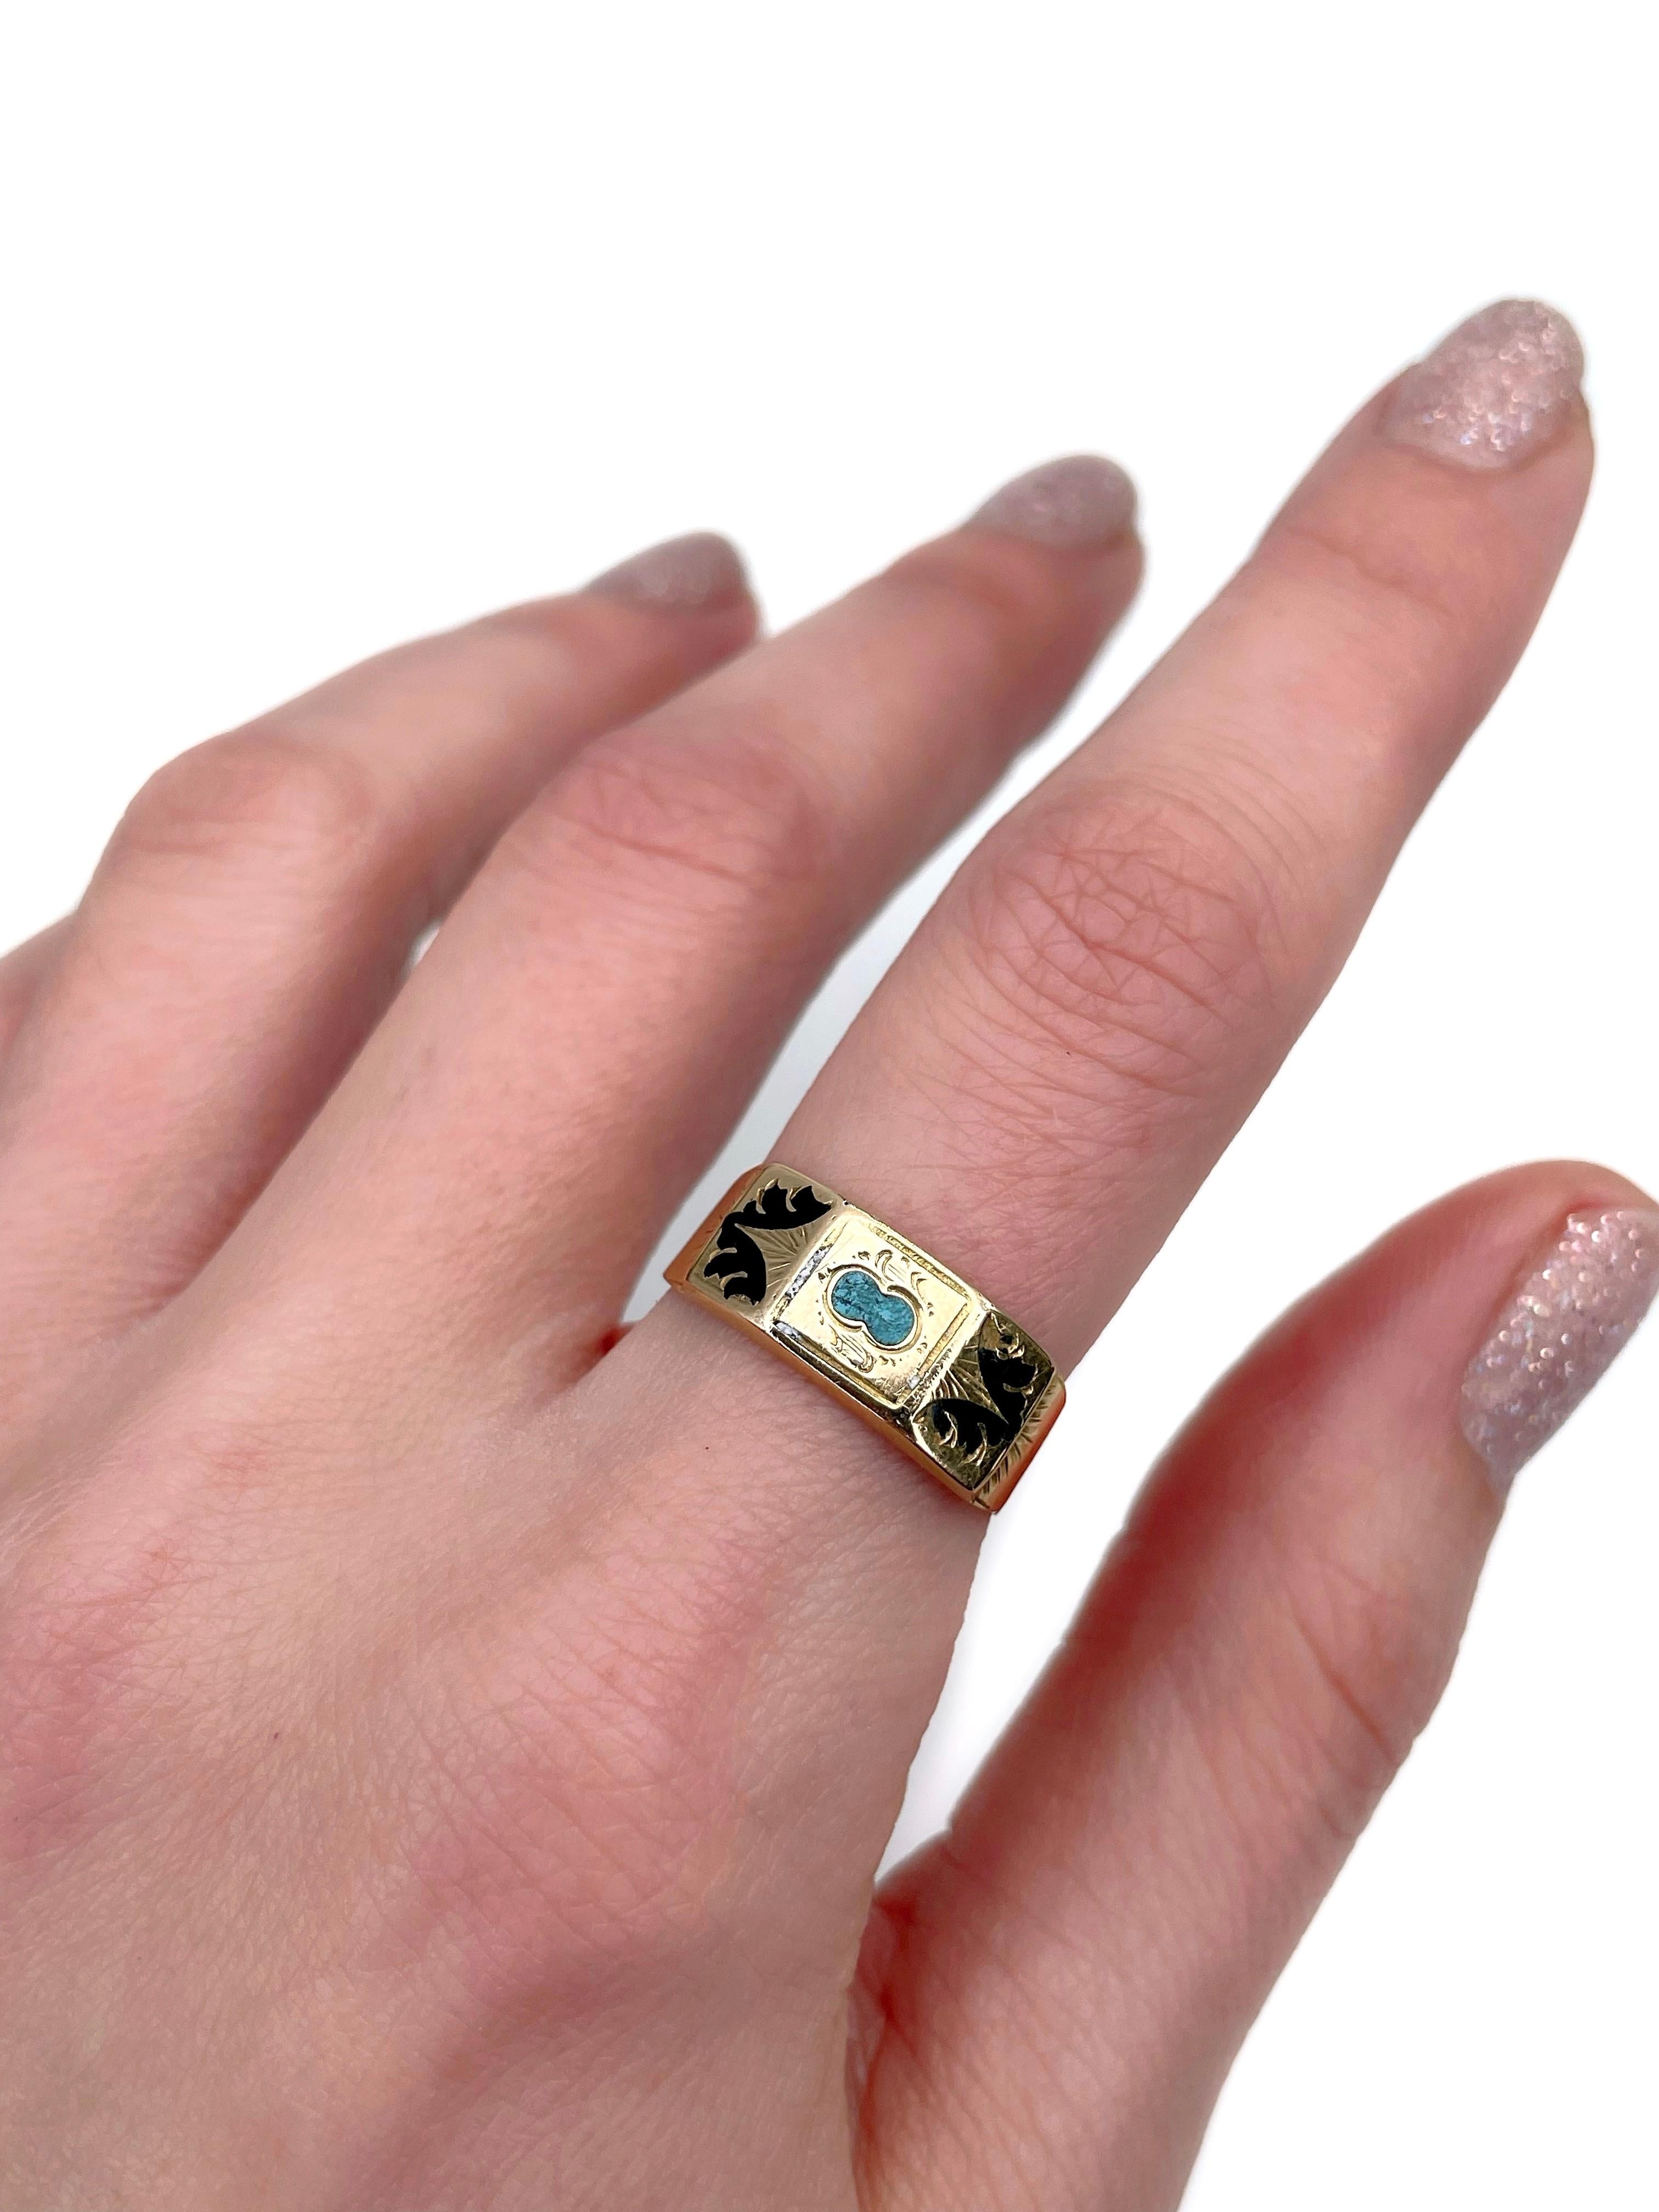 This is a Victorian band ring crafted in 14K yellow gold. Circa 1870. 

The piece features blue and black enamel. 

Weight: 2.03g
Size: 18.75 (US 8.75)

———

If you have any questions, please feel free to ask. We describe our items accurately.